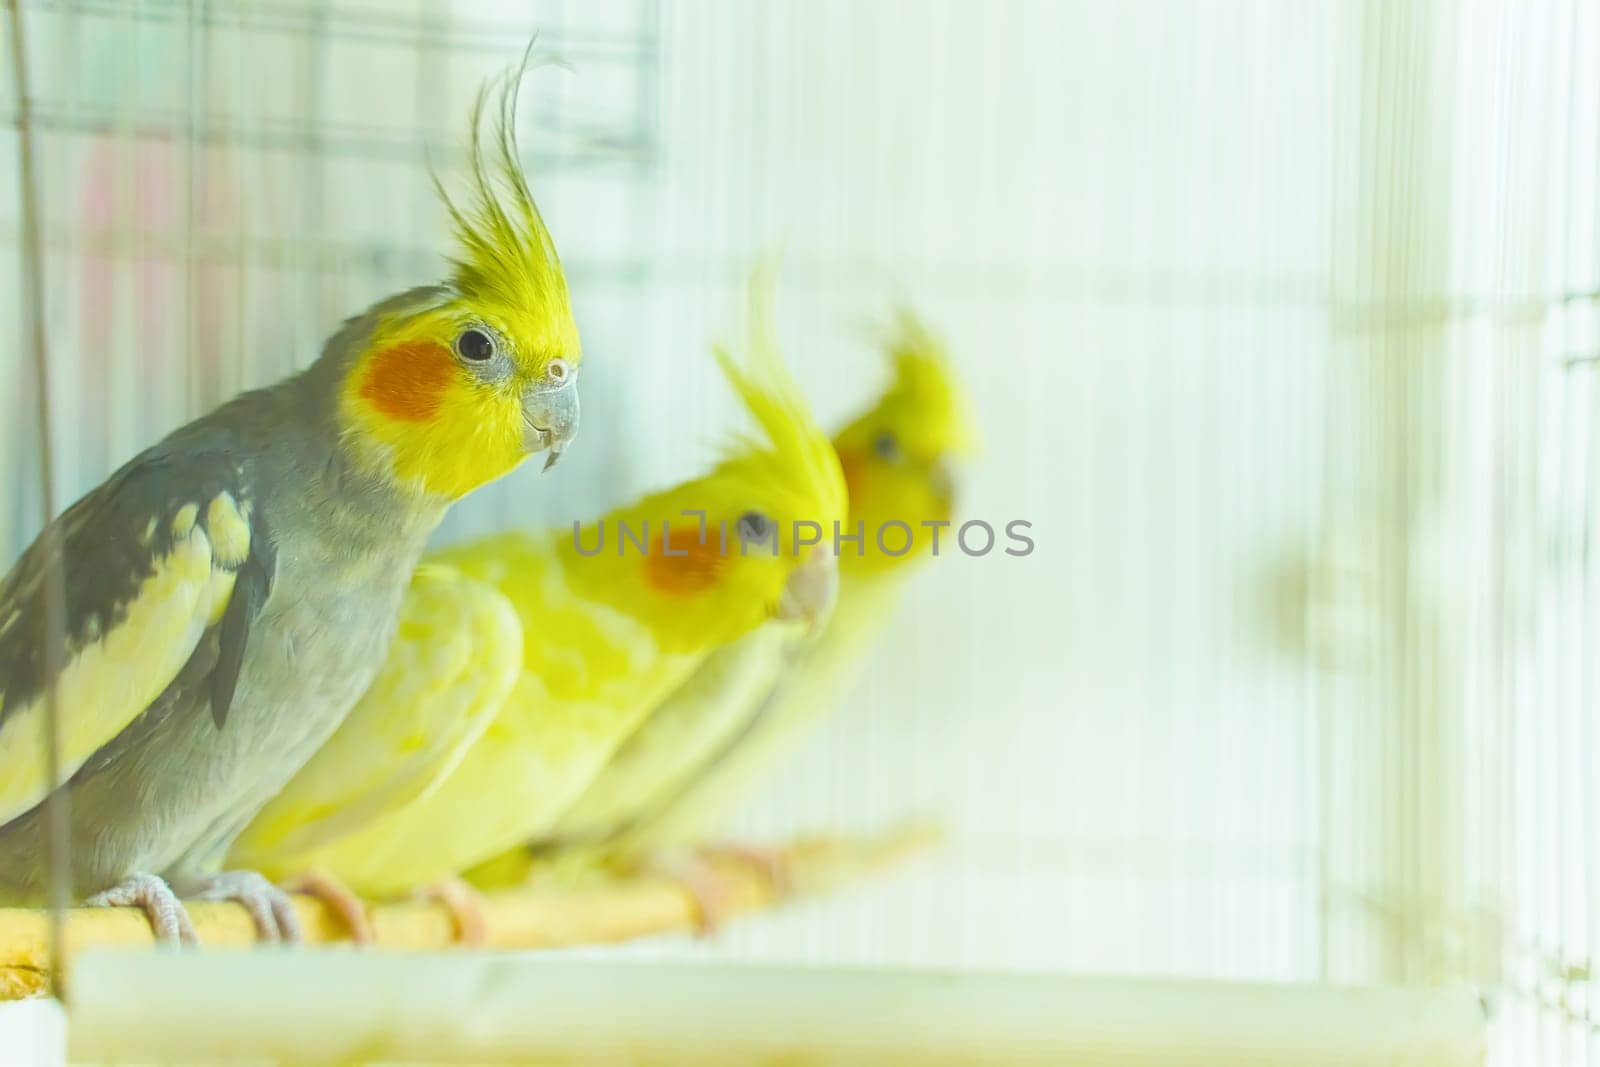 Group of parrot corrals sit and swing in a cage